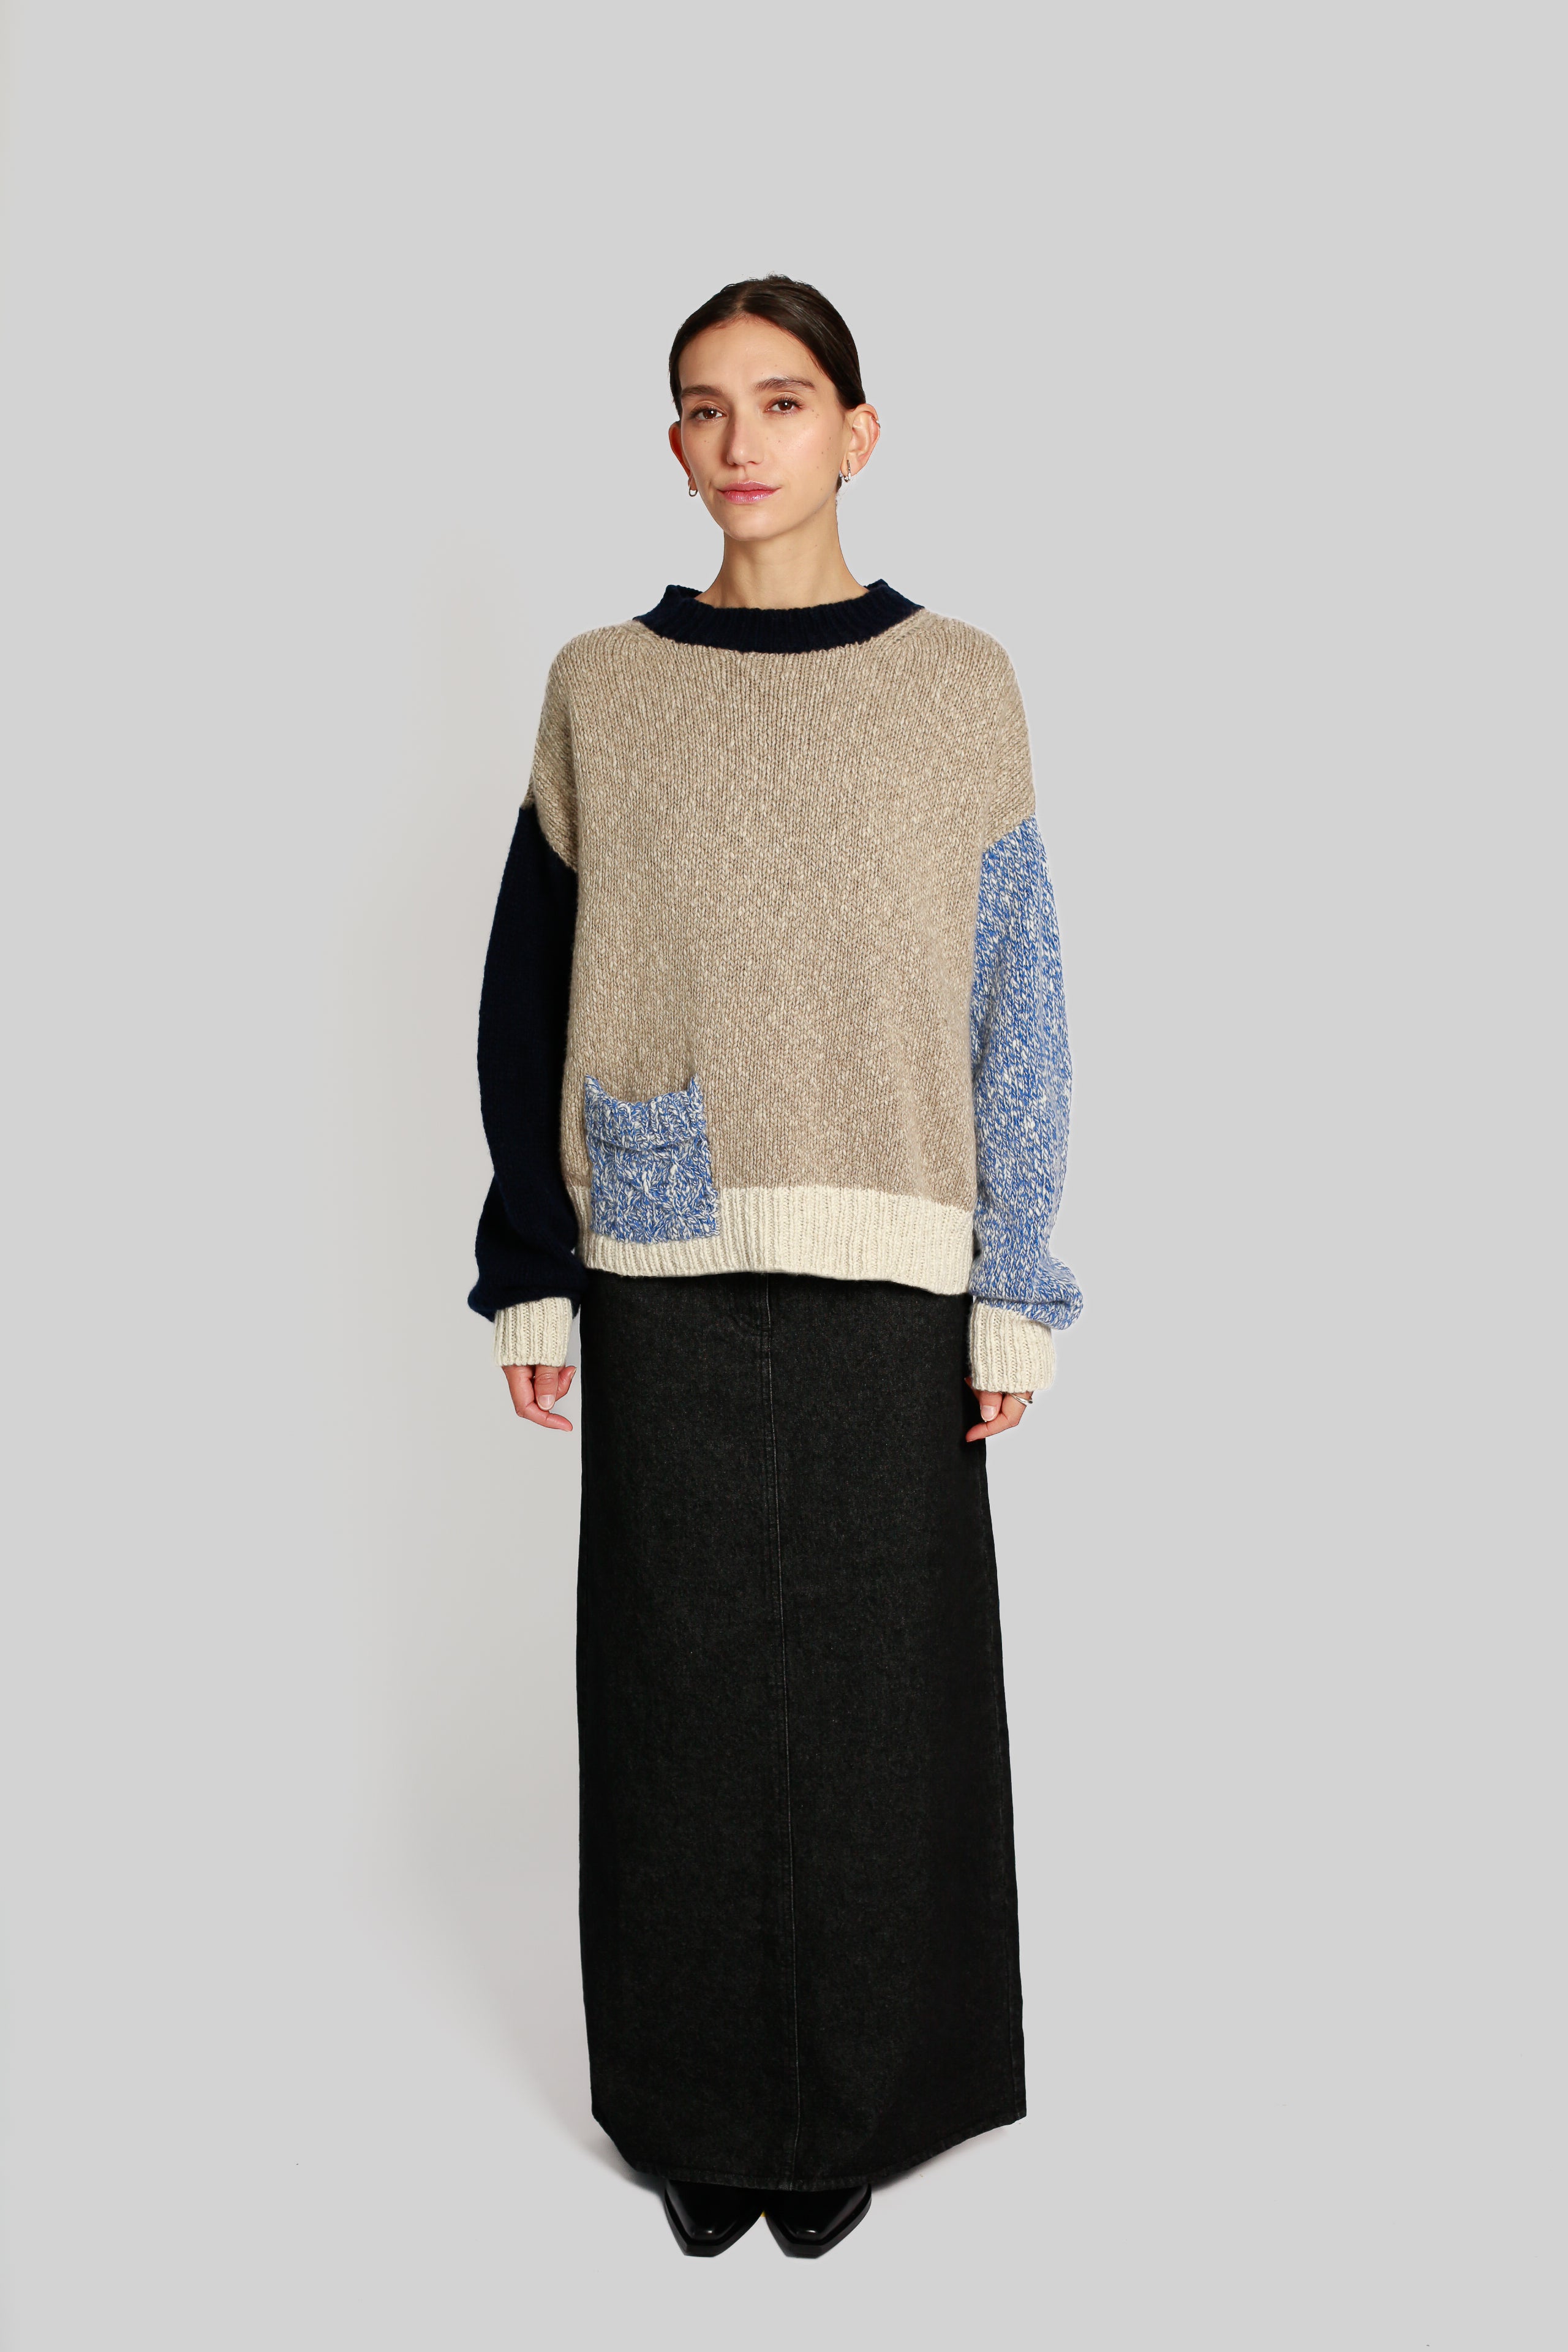 Chiloe Jumper - Made to order